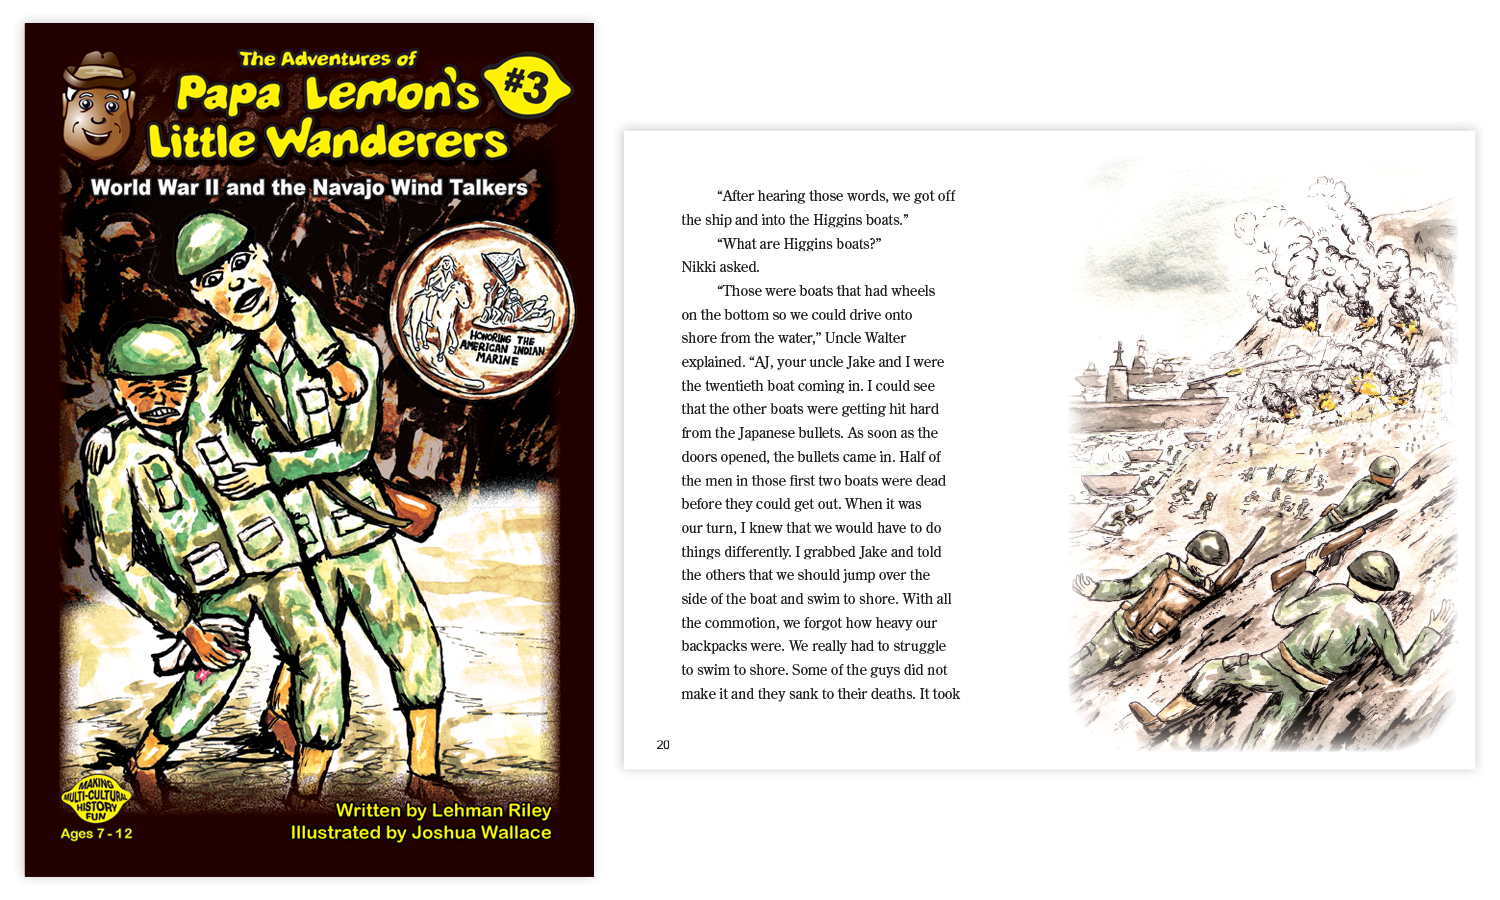 Twin Cities Childrens Book Illustrator Josh Wallace "The Adventures of Papa Lemon's Little Wanderers, Book 3: World War II and the Navajo Wind Talkers"